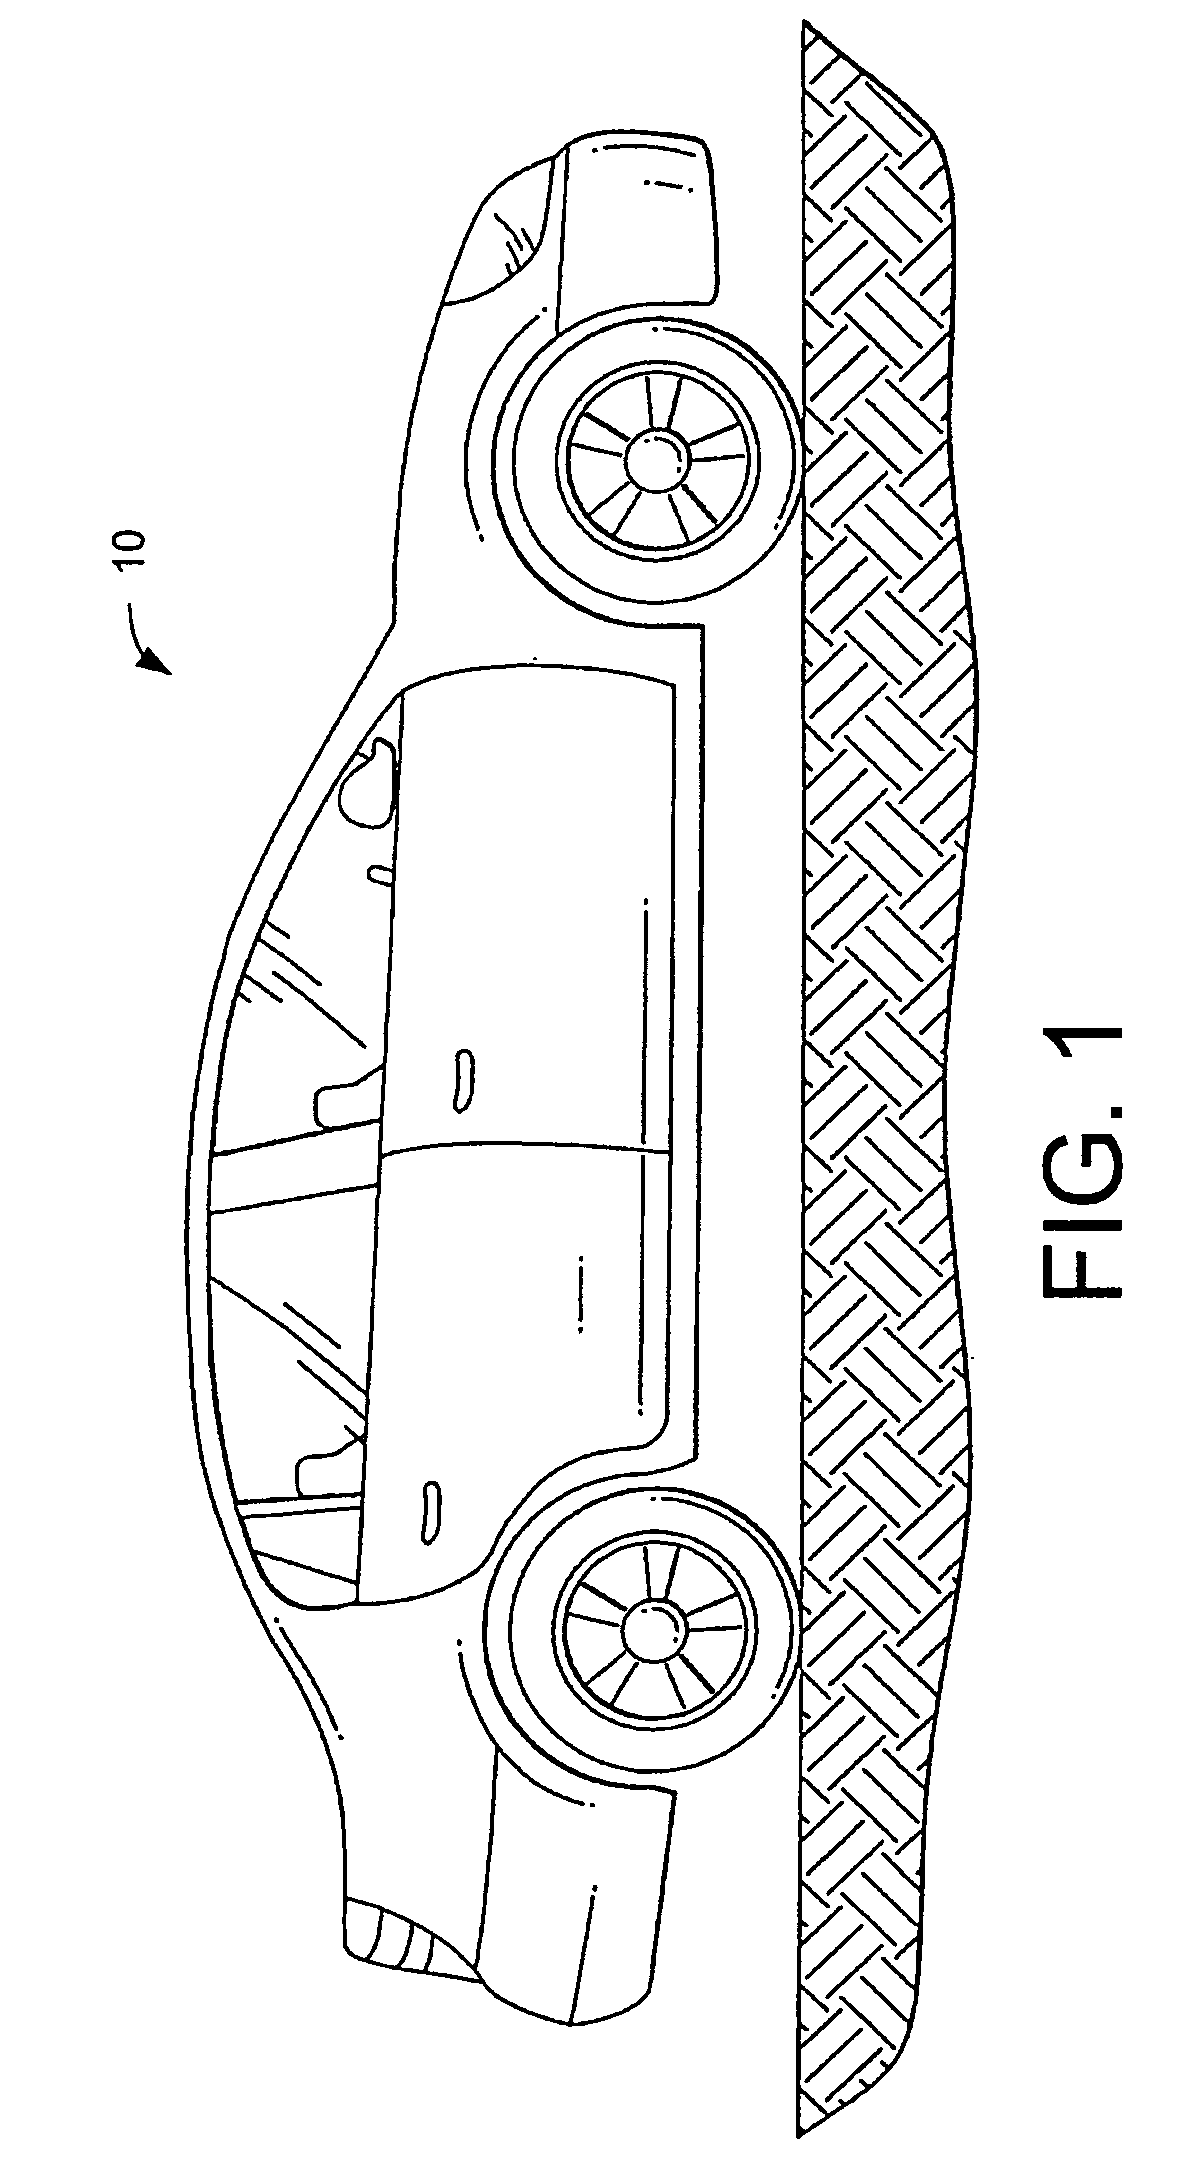 Contact-free vehicle air vent